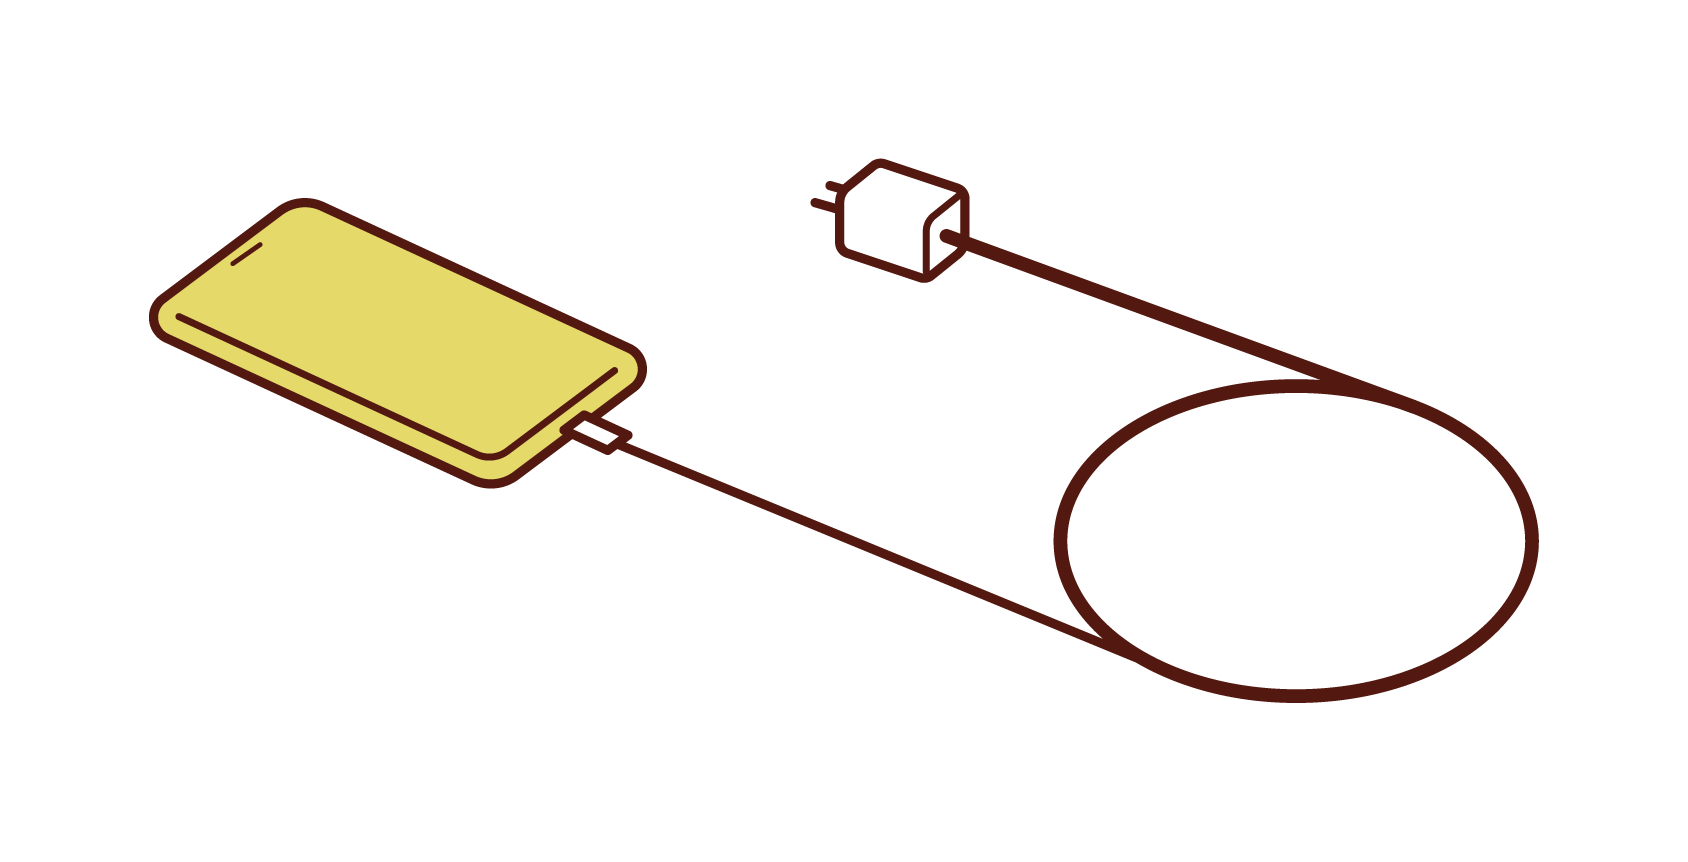 Illustration of smartphone and charging cable